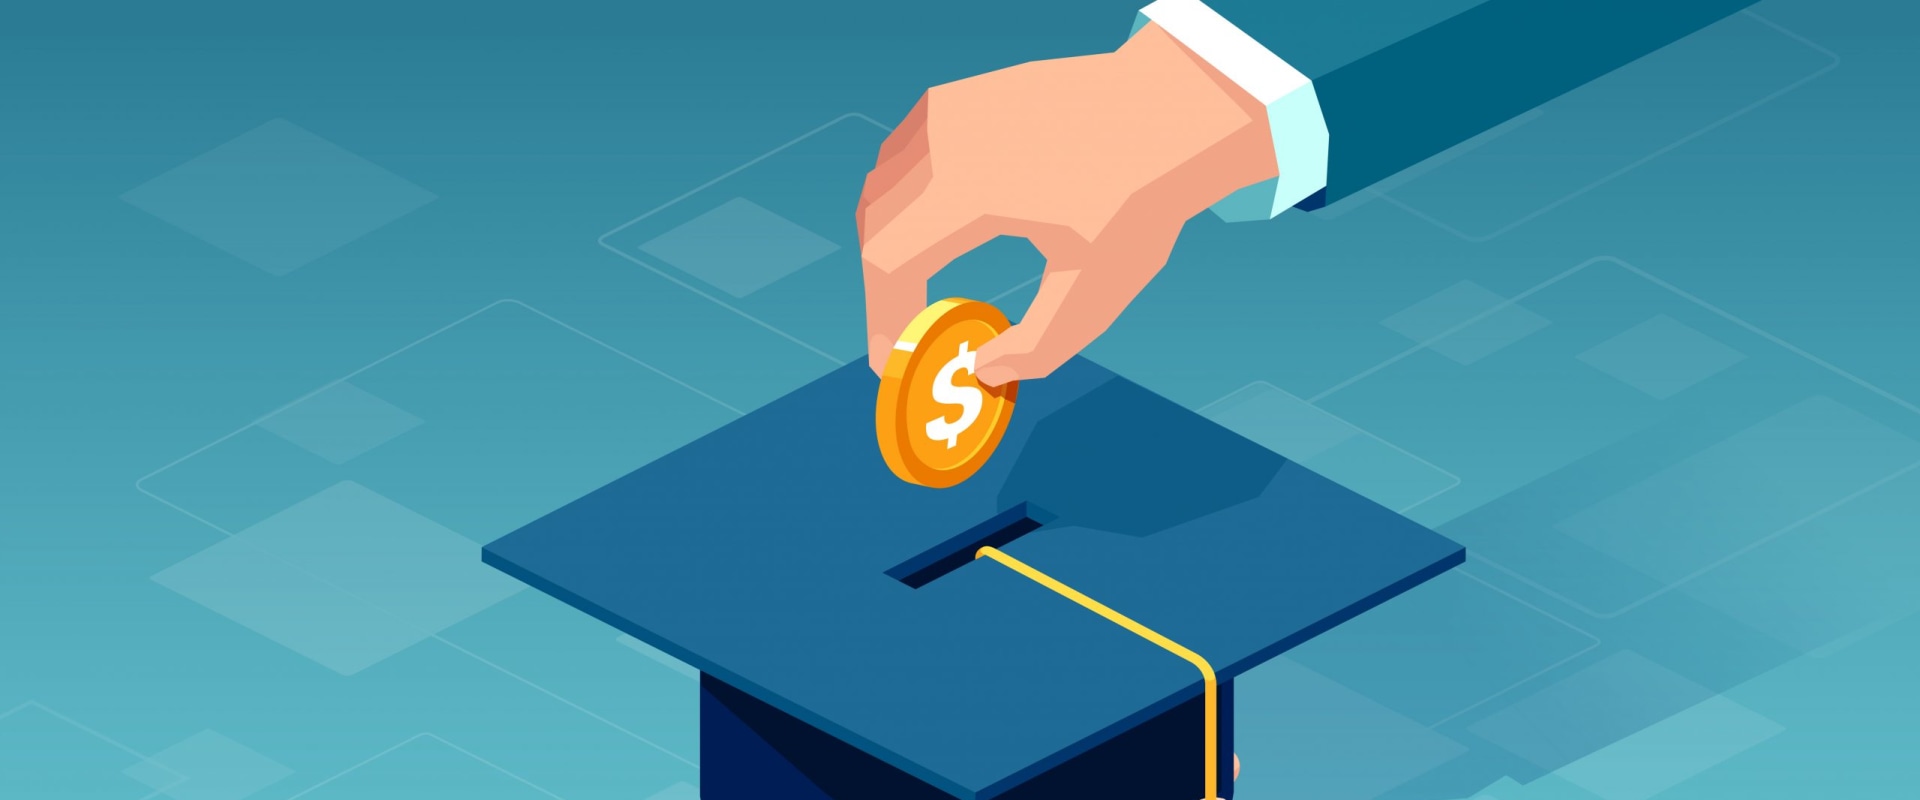 Lower Tuition Costs - A Comprehensive Look at the Financial Benefits of Small Schools